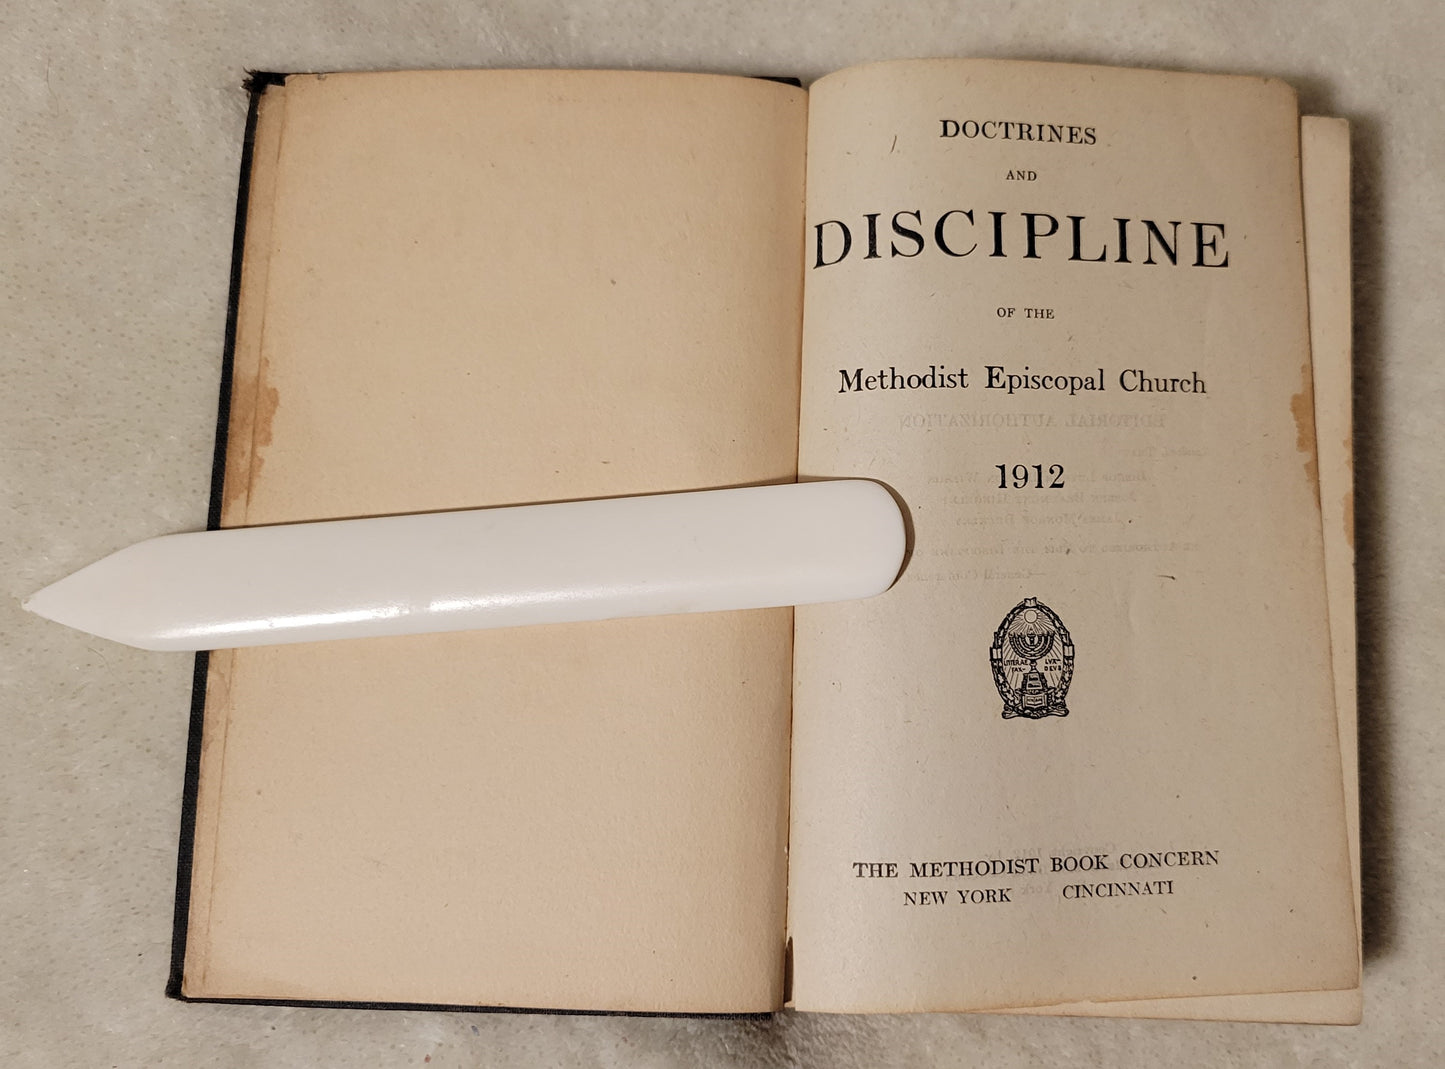 Antique book "Doctrines and Discipline of the Methodist Episcopal Church" published by the Methodist Book Concern, 1912. View of inside title page.